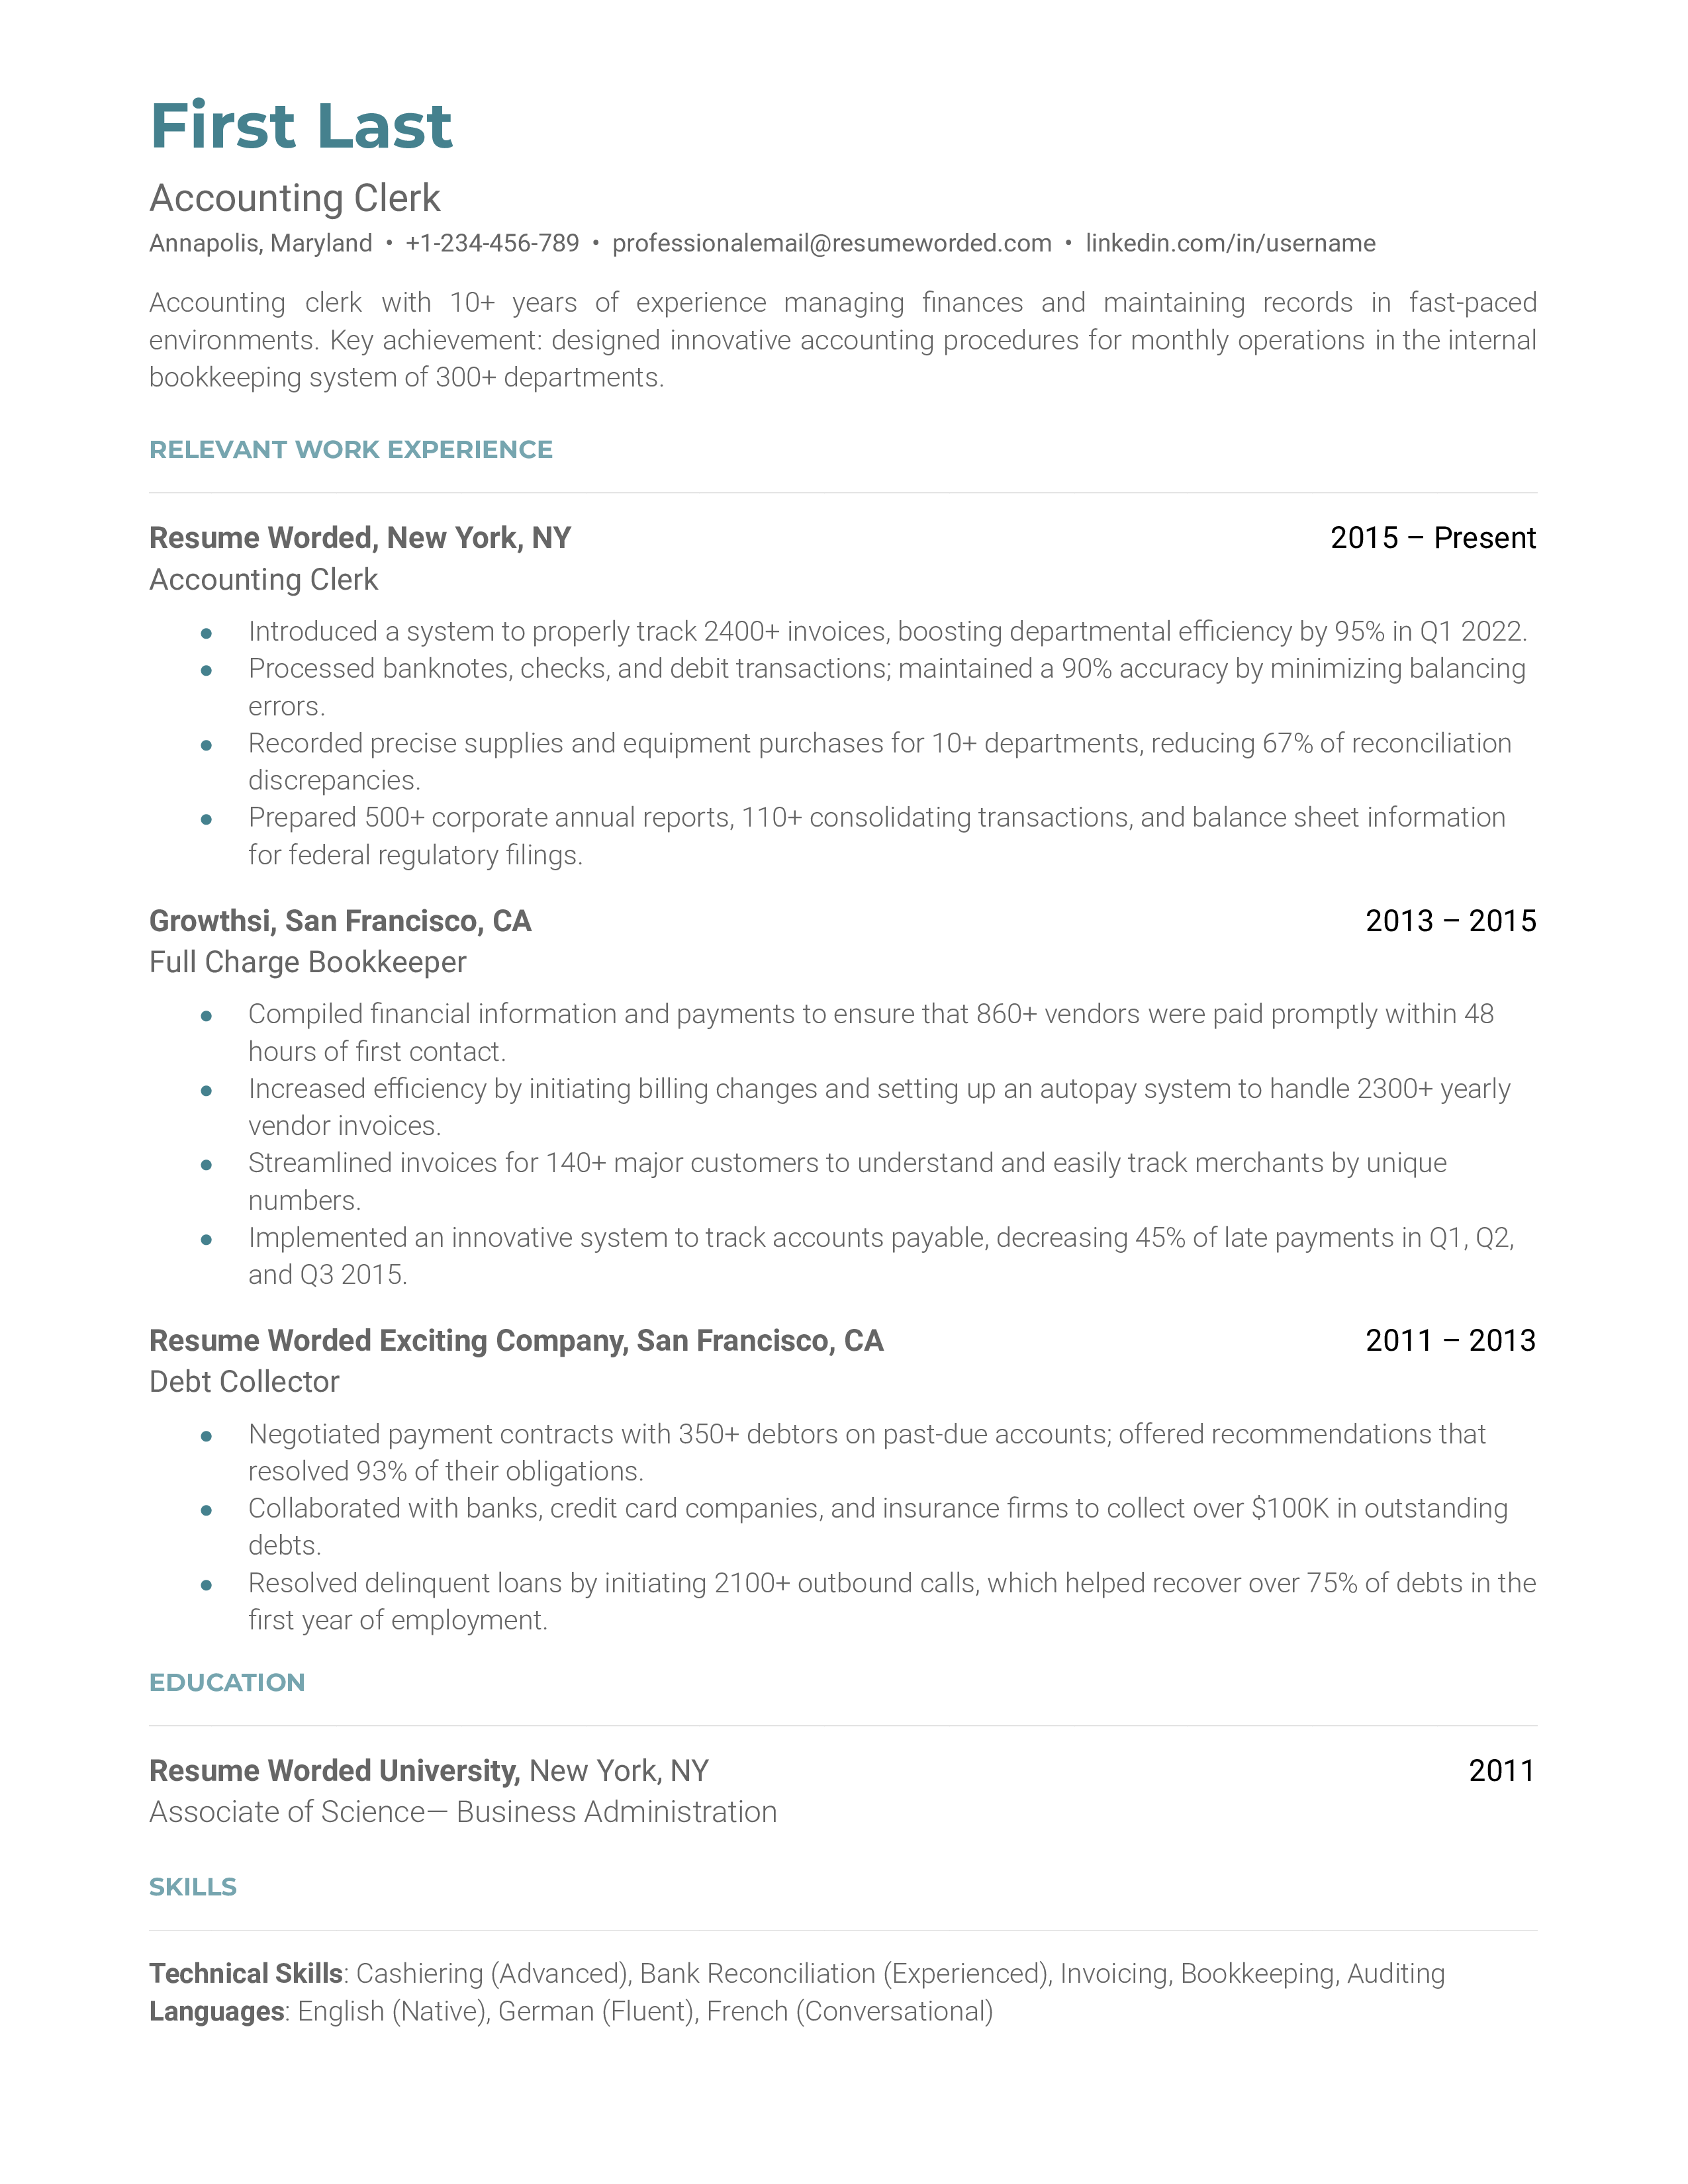 A resume for a accounting clerk with a bachelor's degree in financial management and previous experience as an account clerk.